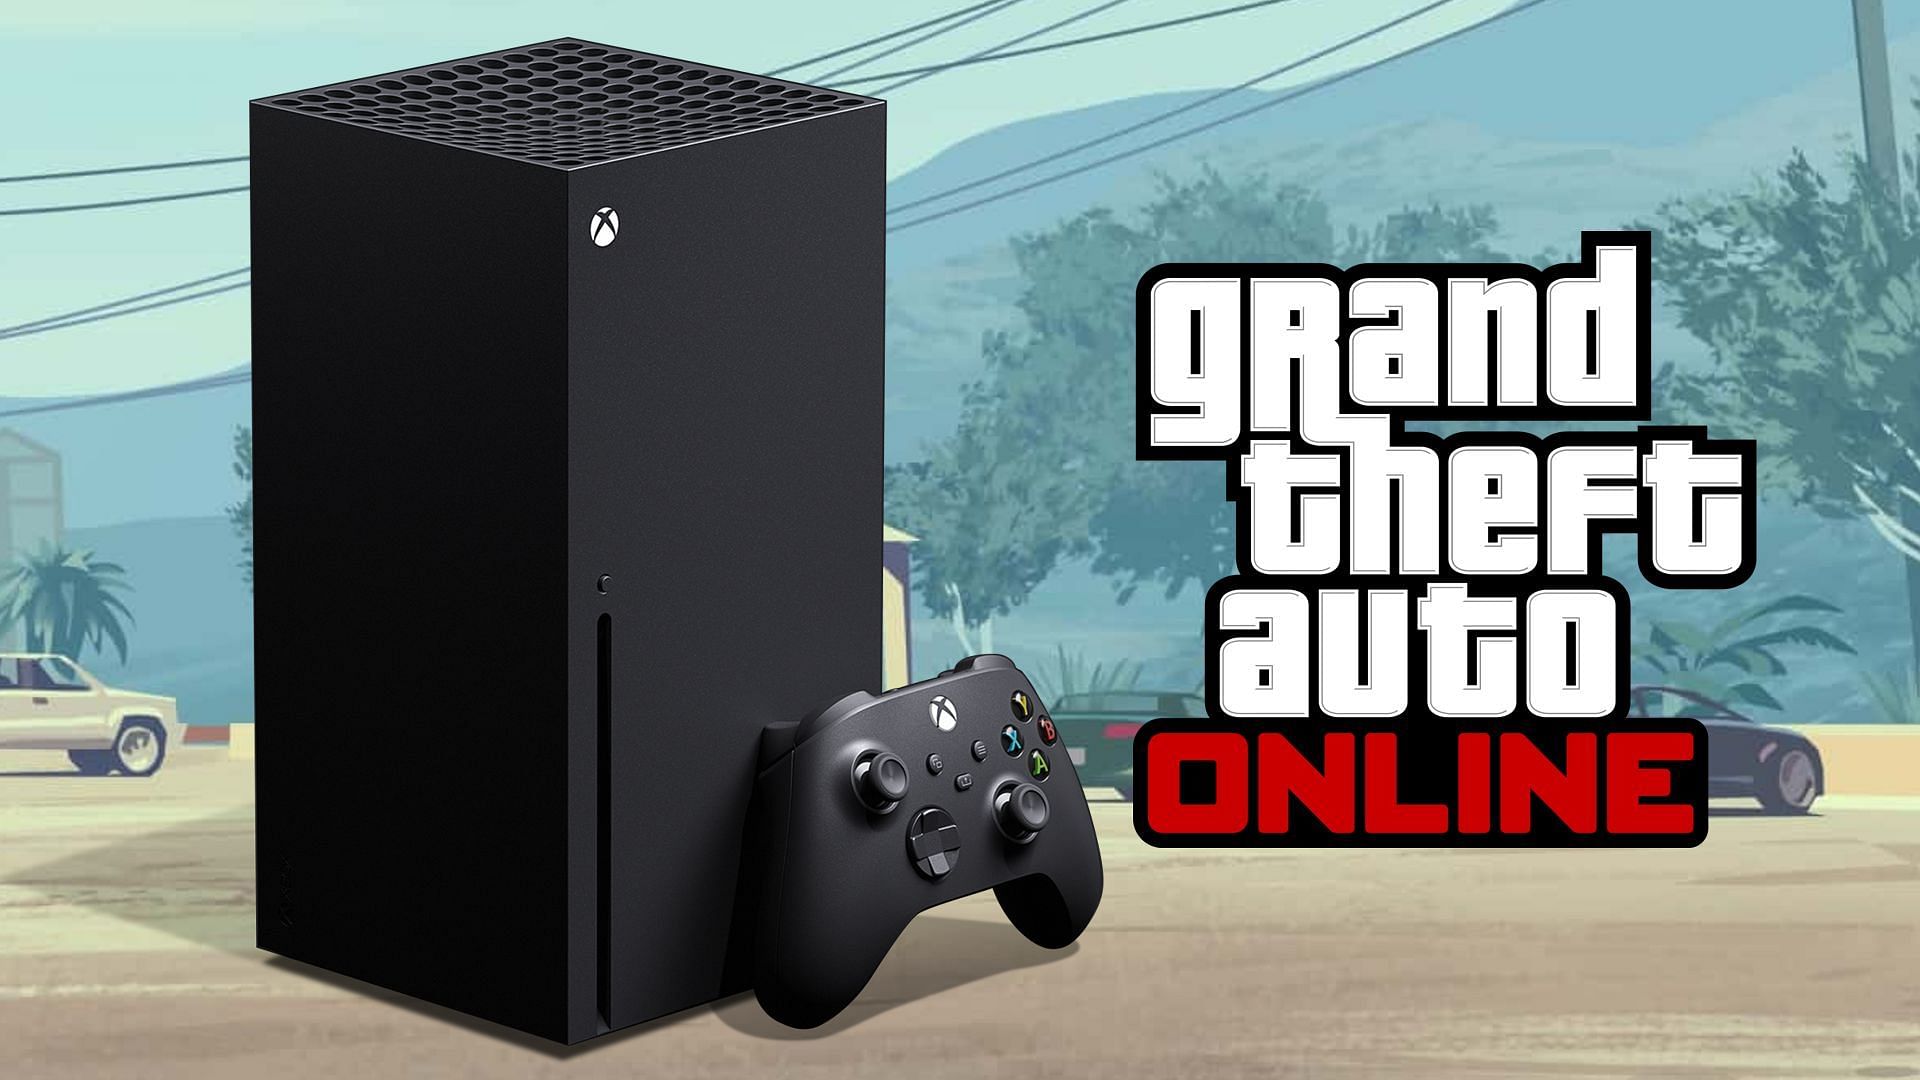 input in issues Games Online Xbox works X/S for GTA Fix reportedly Series by Rockstar